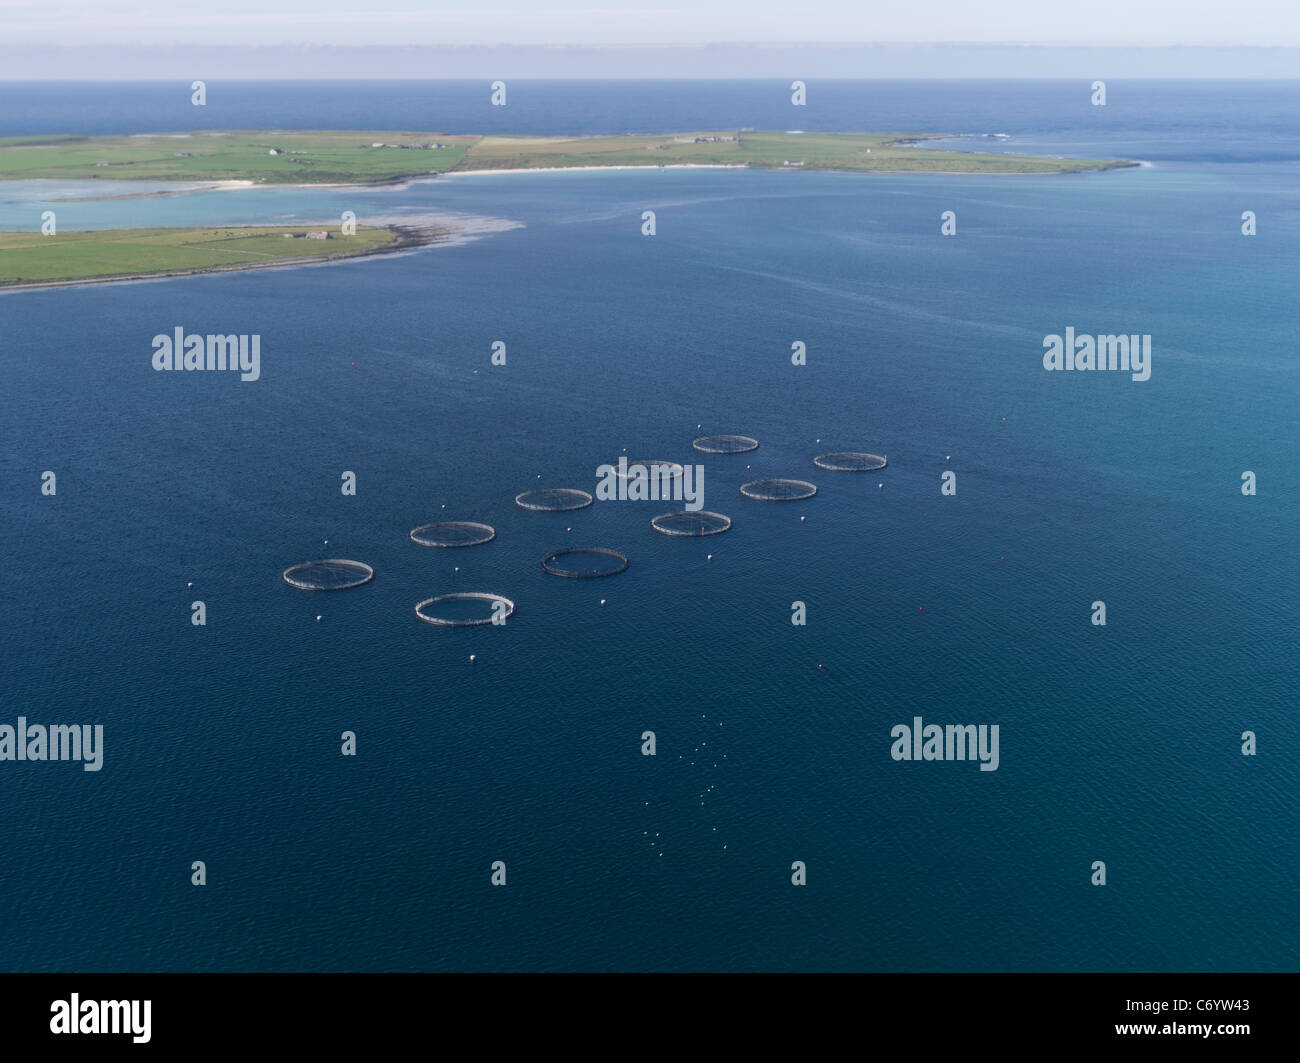 dh Scottish Salmon fishfarm WESTRAY ORKNEY Islands Circular fish farm cages from above aerial view remote island scotland Stock Photo